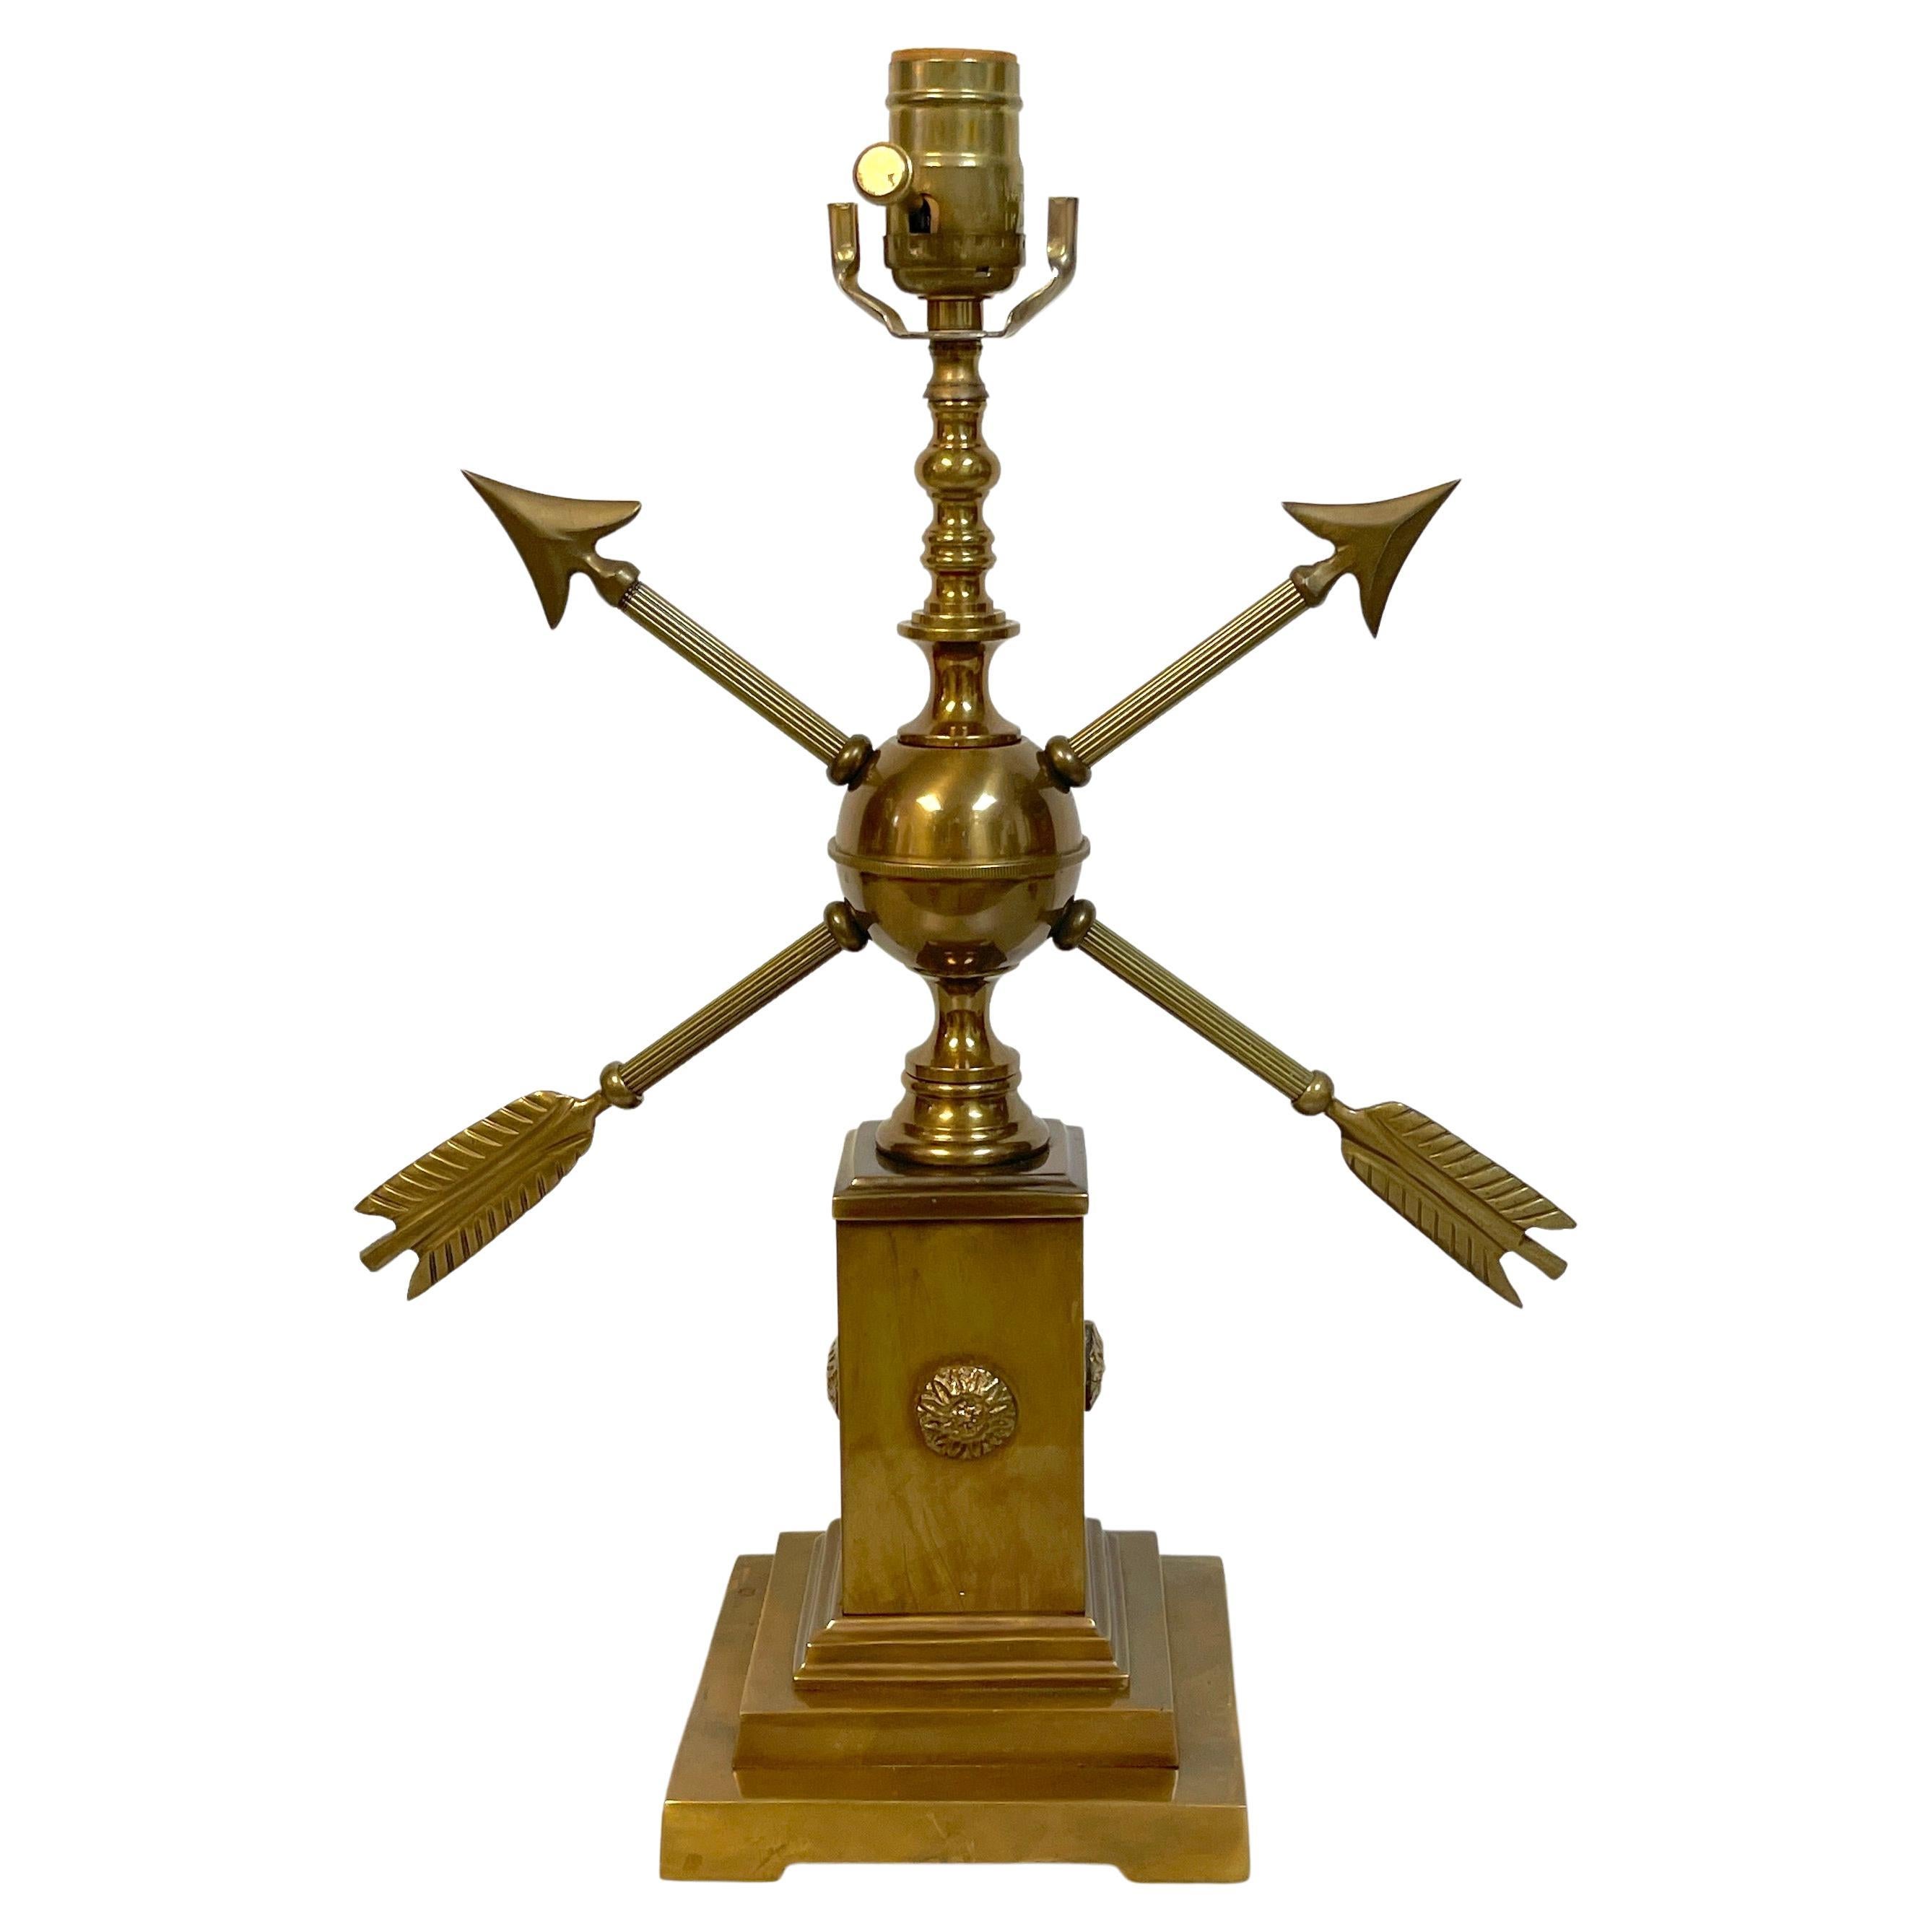 French Modern Patinated Brass Arrow Motif Lamp in the Style of Adnet